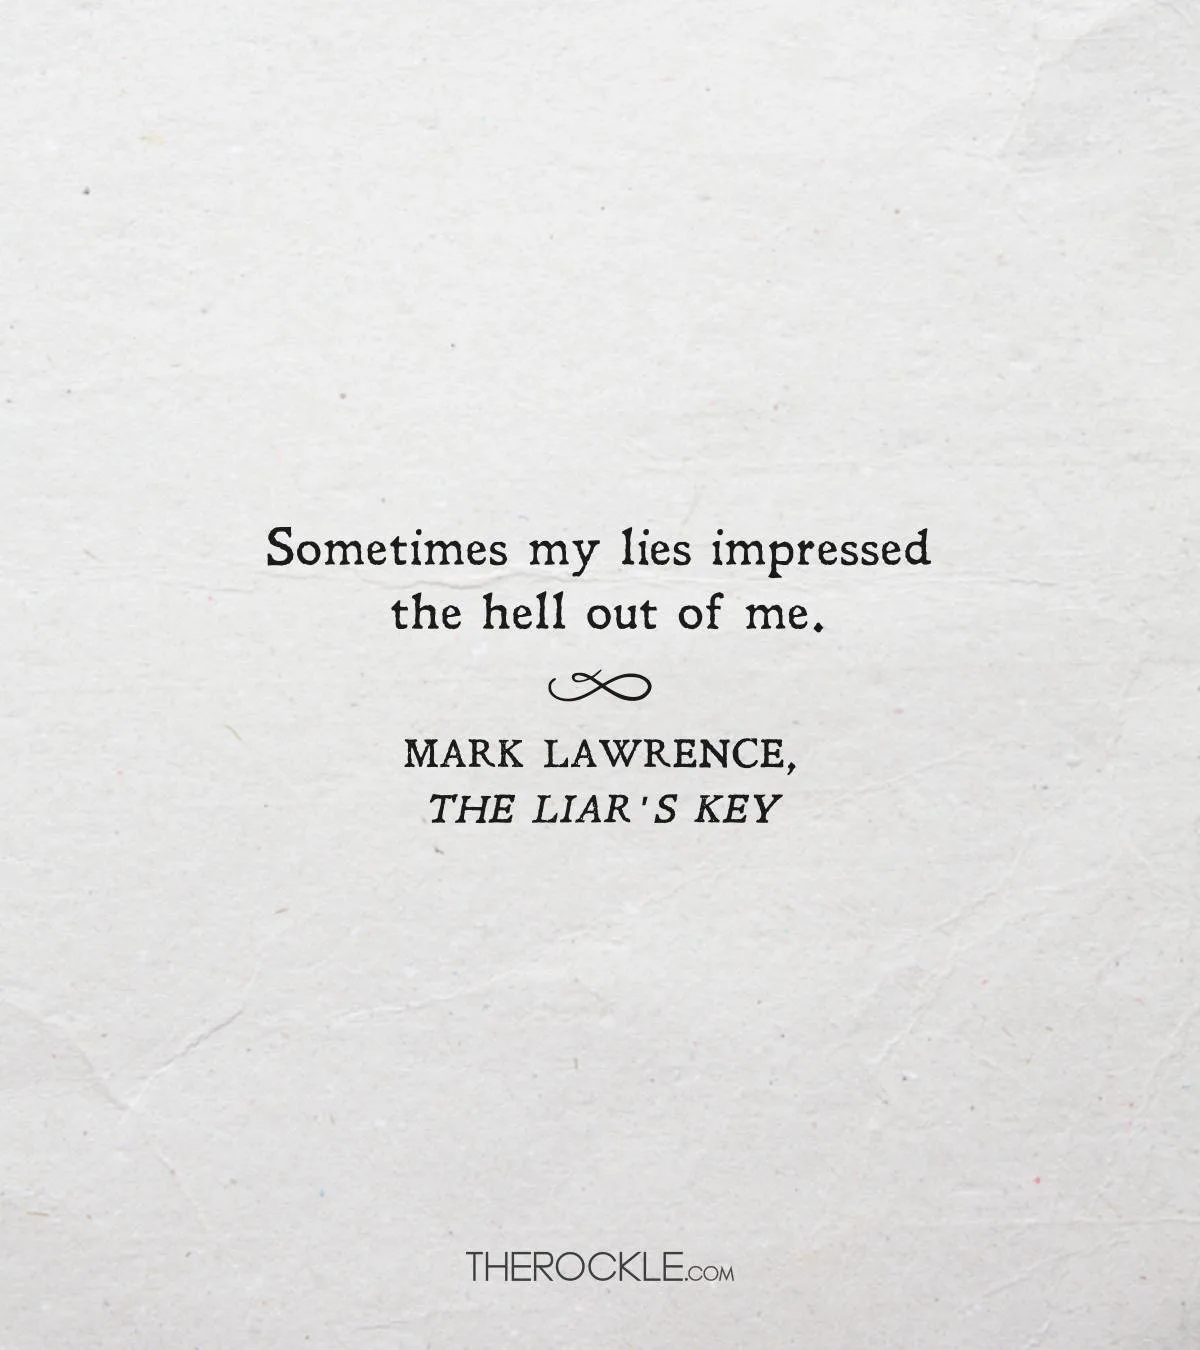 Quote from Mark Lawrence's The Liar's Key book